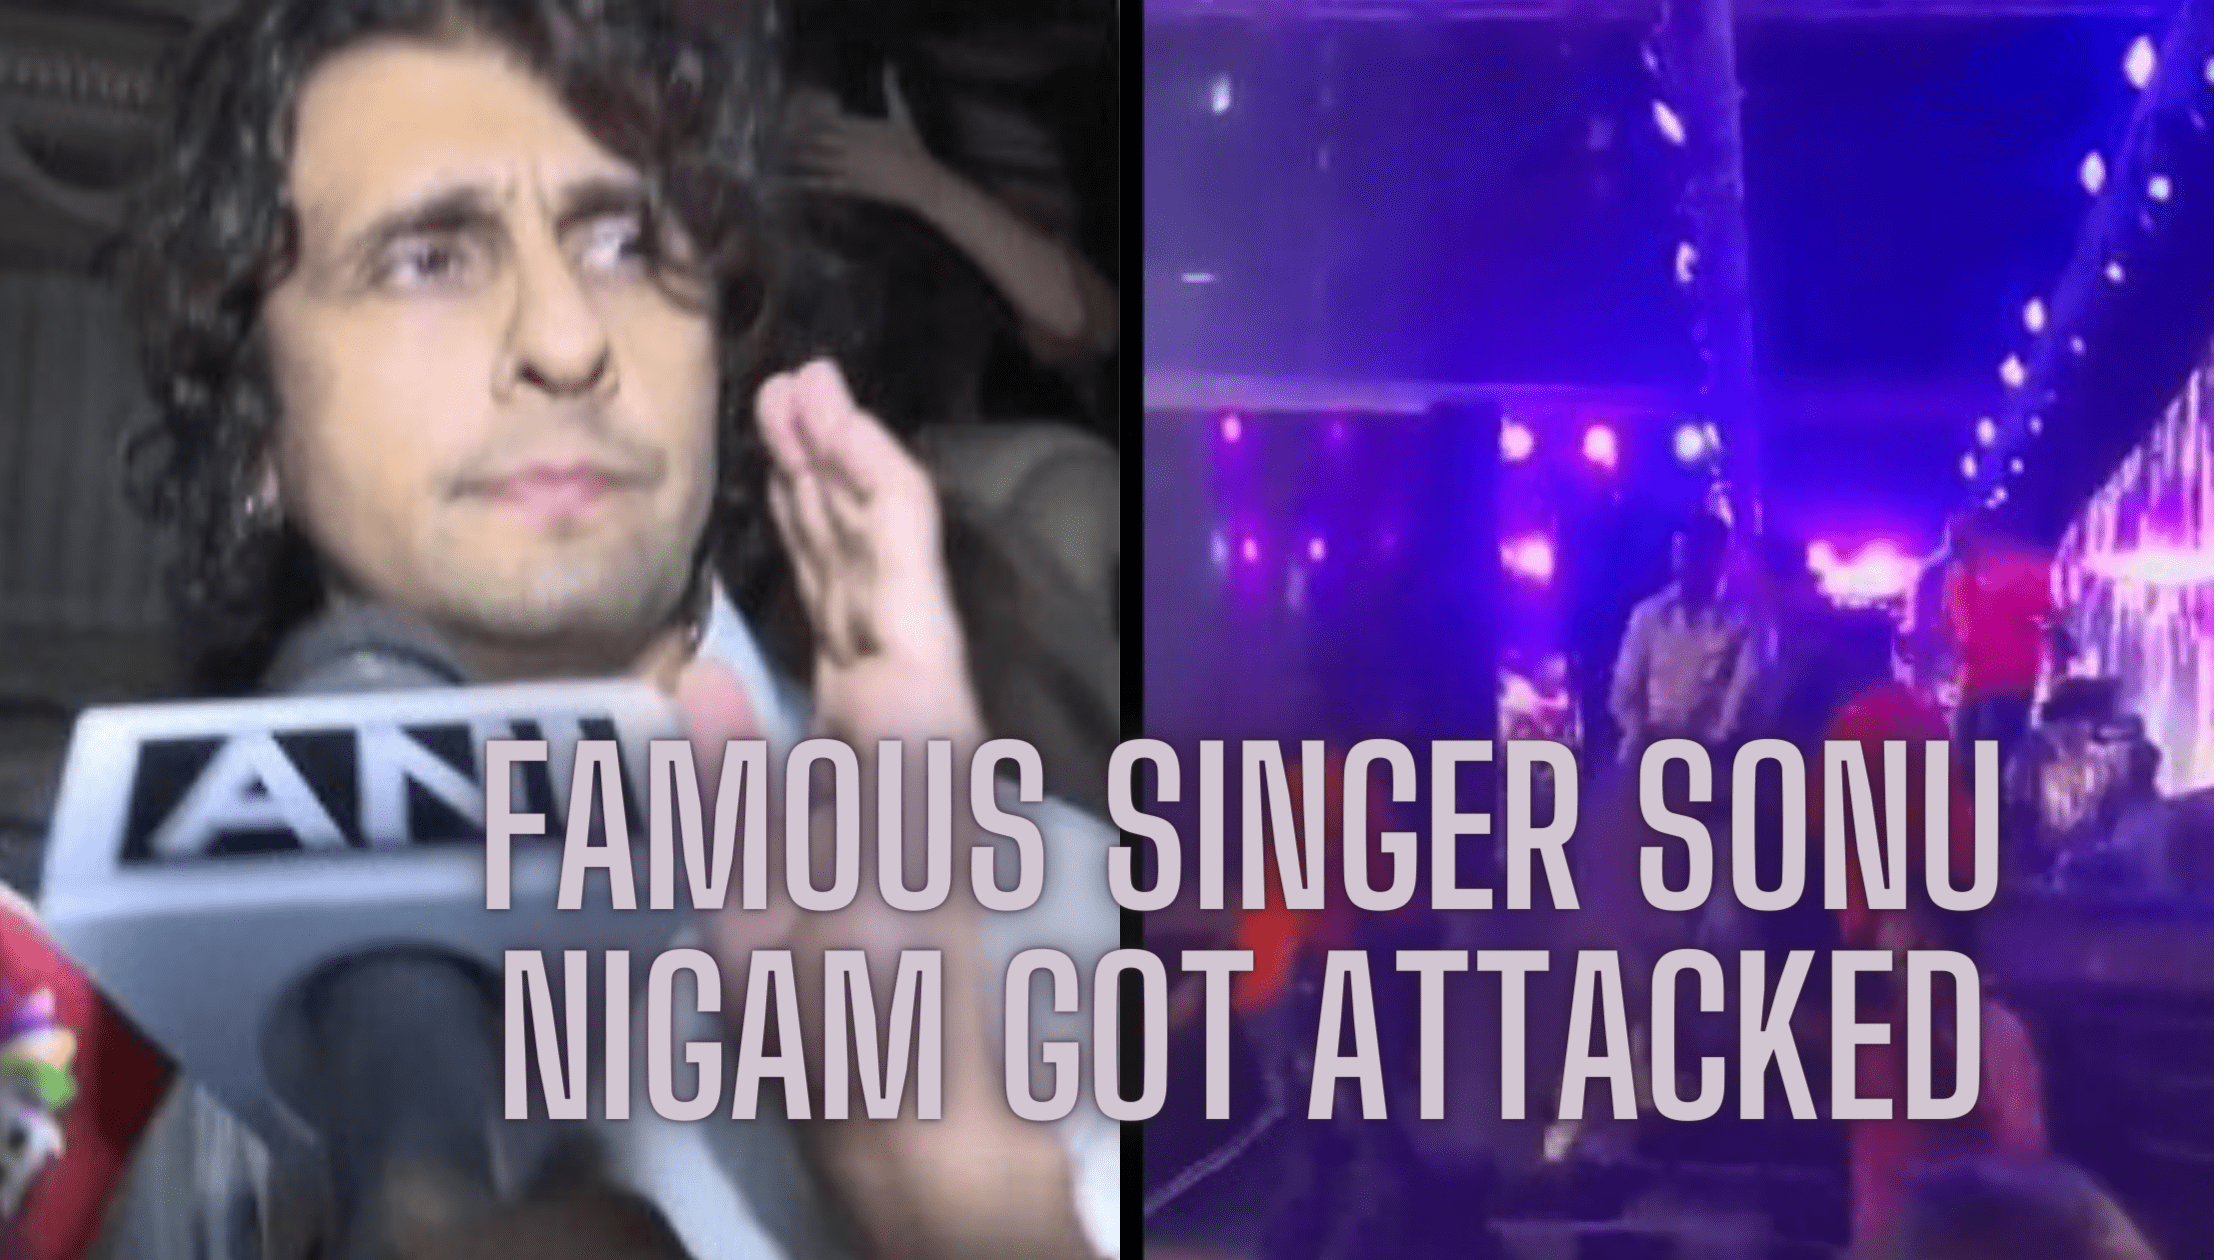 Famous singer Sonu Nigam got attacked (1)